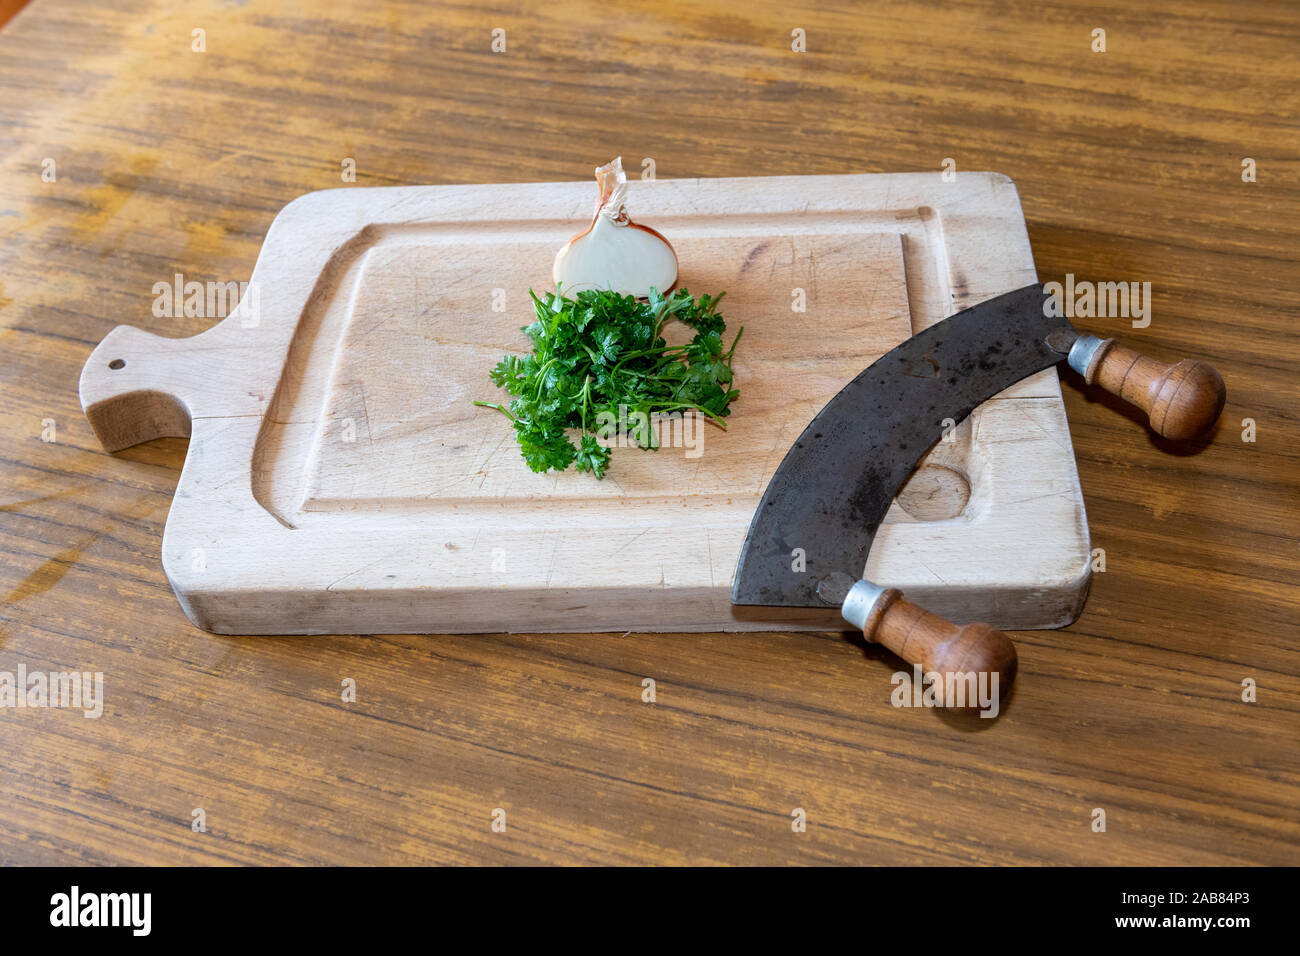 https://c8.alamy.com/comp/2AB84P3/onion-parsley-and-chopper-on-a-wooden-board-in-a-kitchen-2AB84P3.jpg